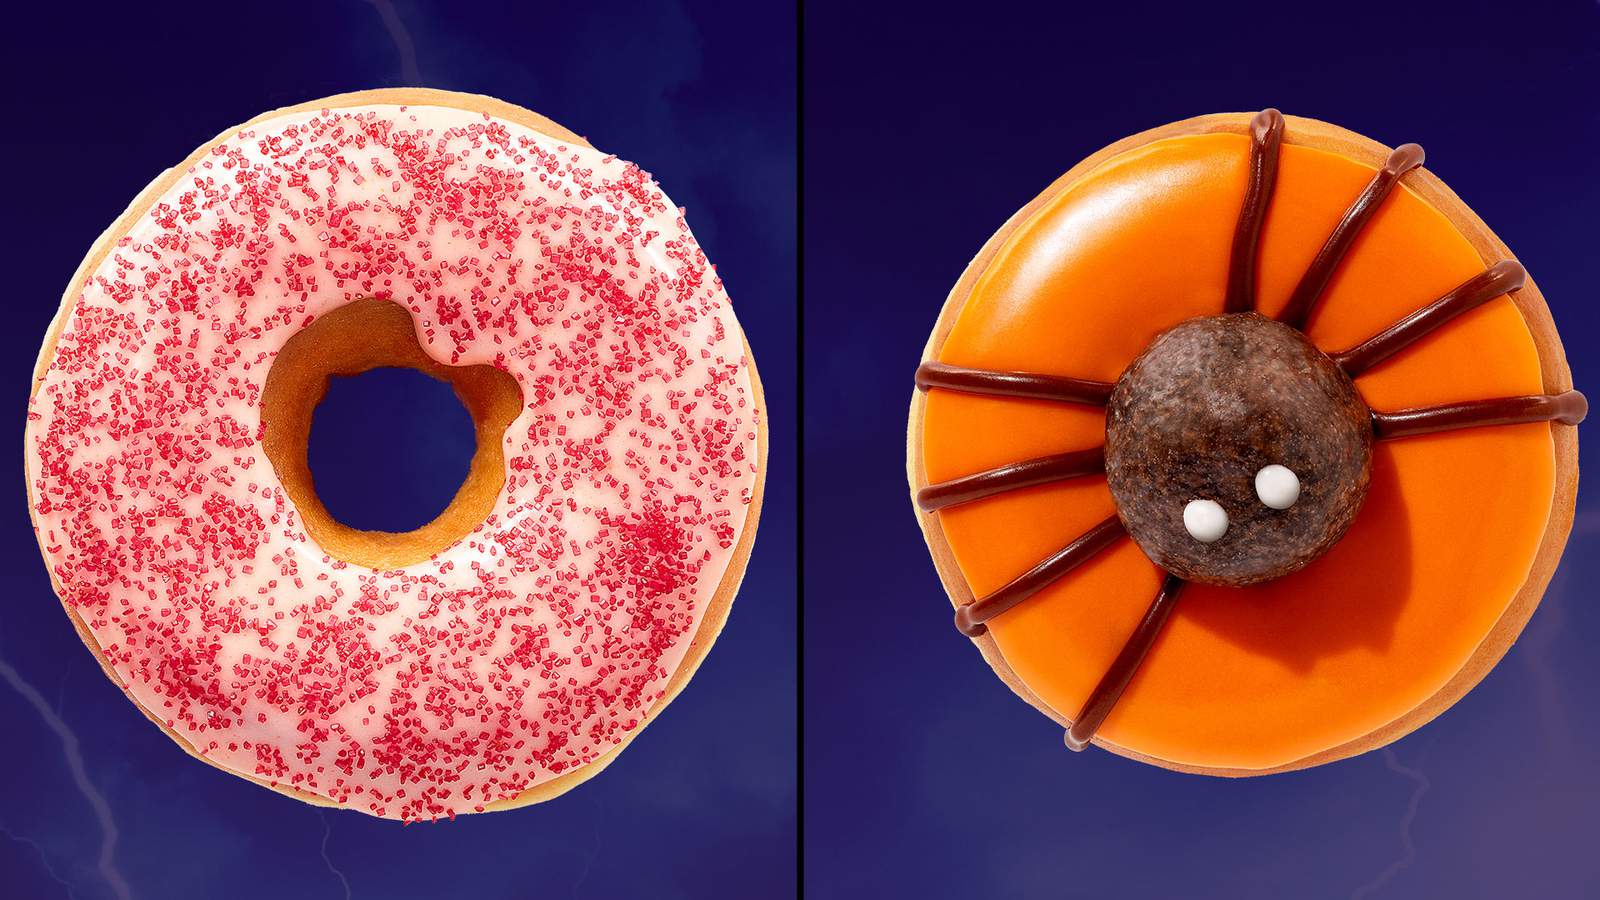 Dunkin' is getting spicy for Halloween with new ghost pepper donut